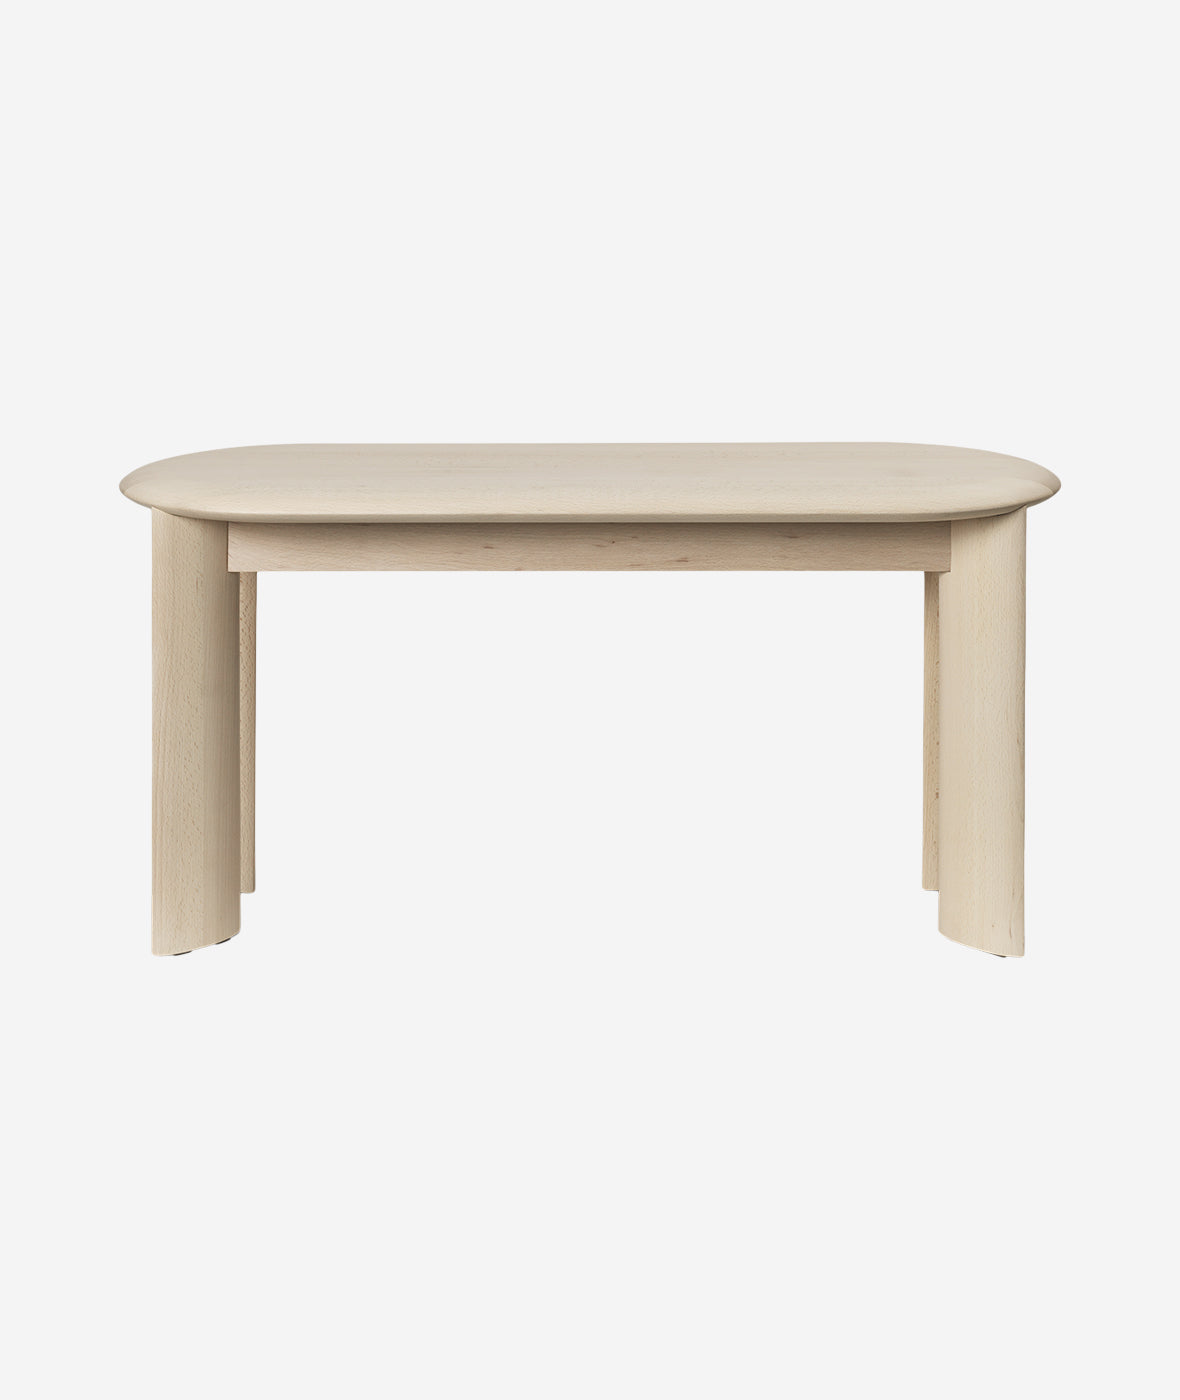 Bevel Bench - More Options